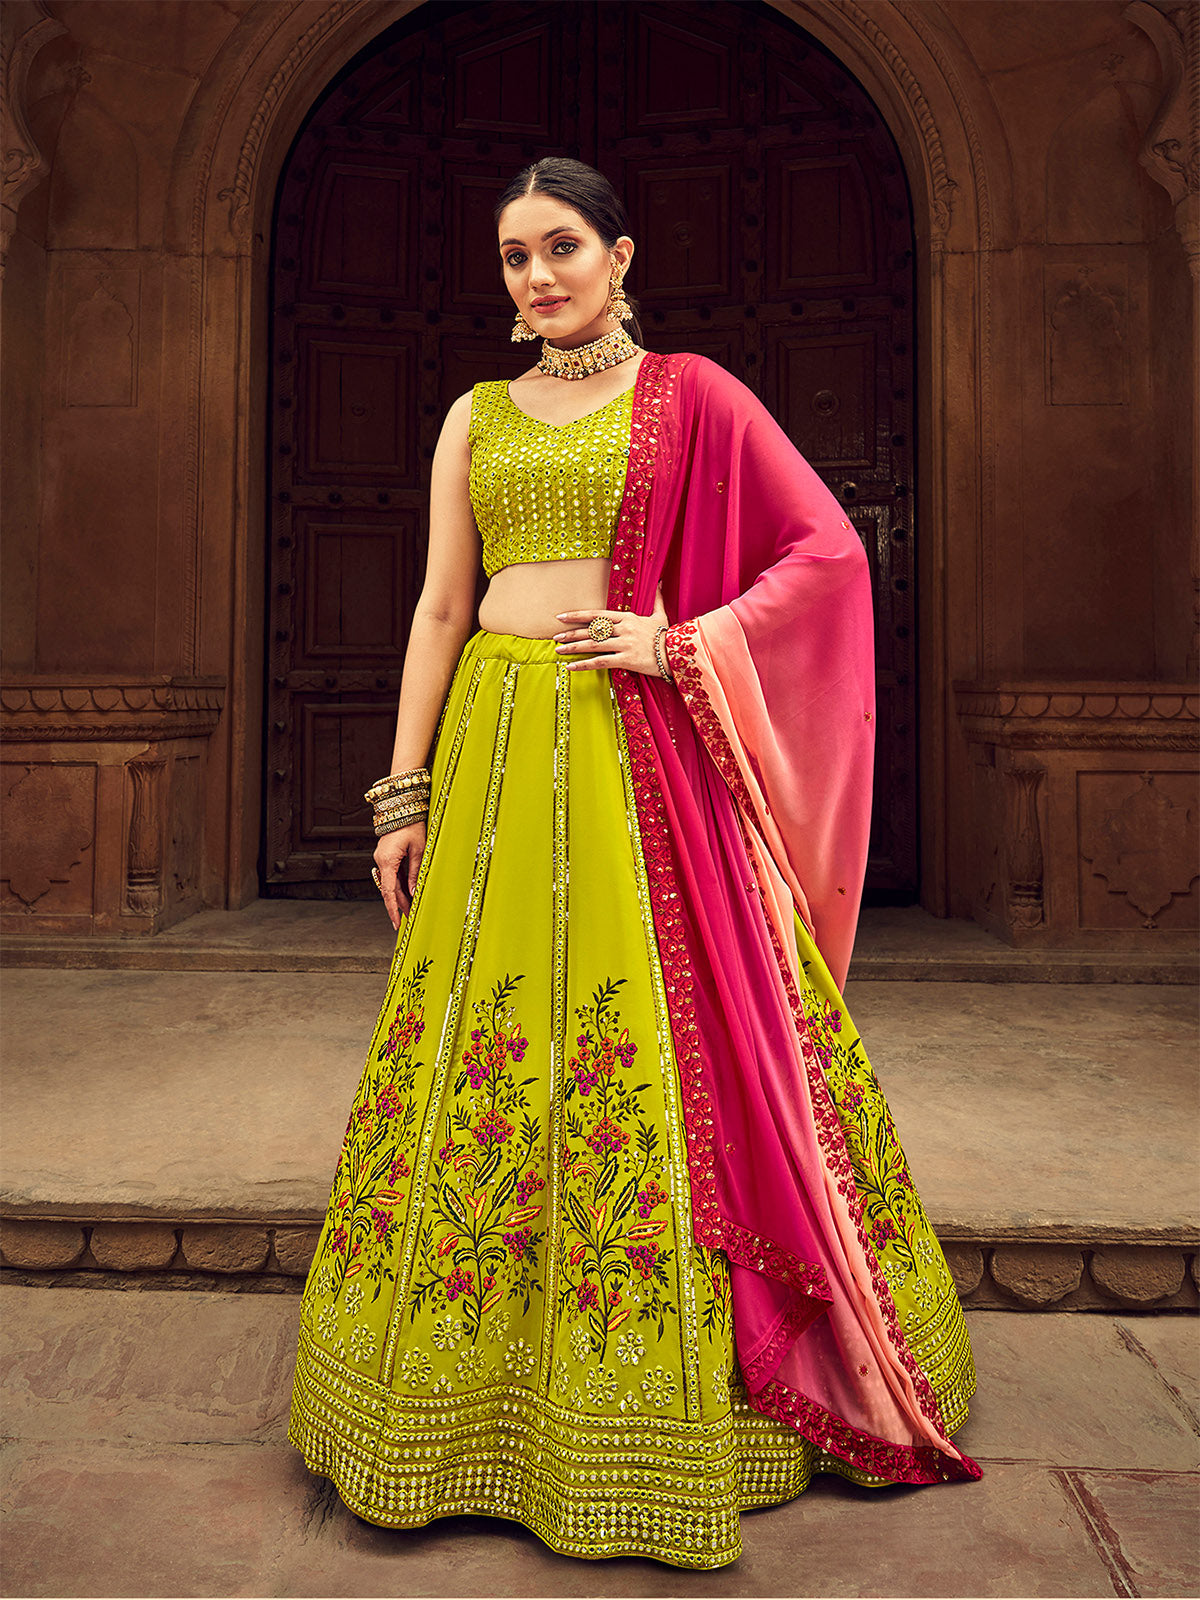 The Prettiest Lime Green Lehengas We Spotted On Brides! | Lehnga designs,  Indian bridal outfits, Indian wedding dress